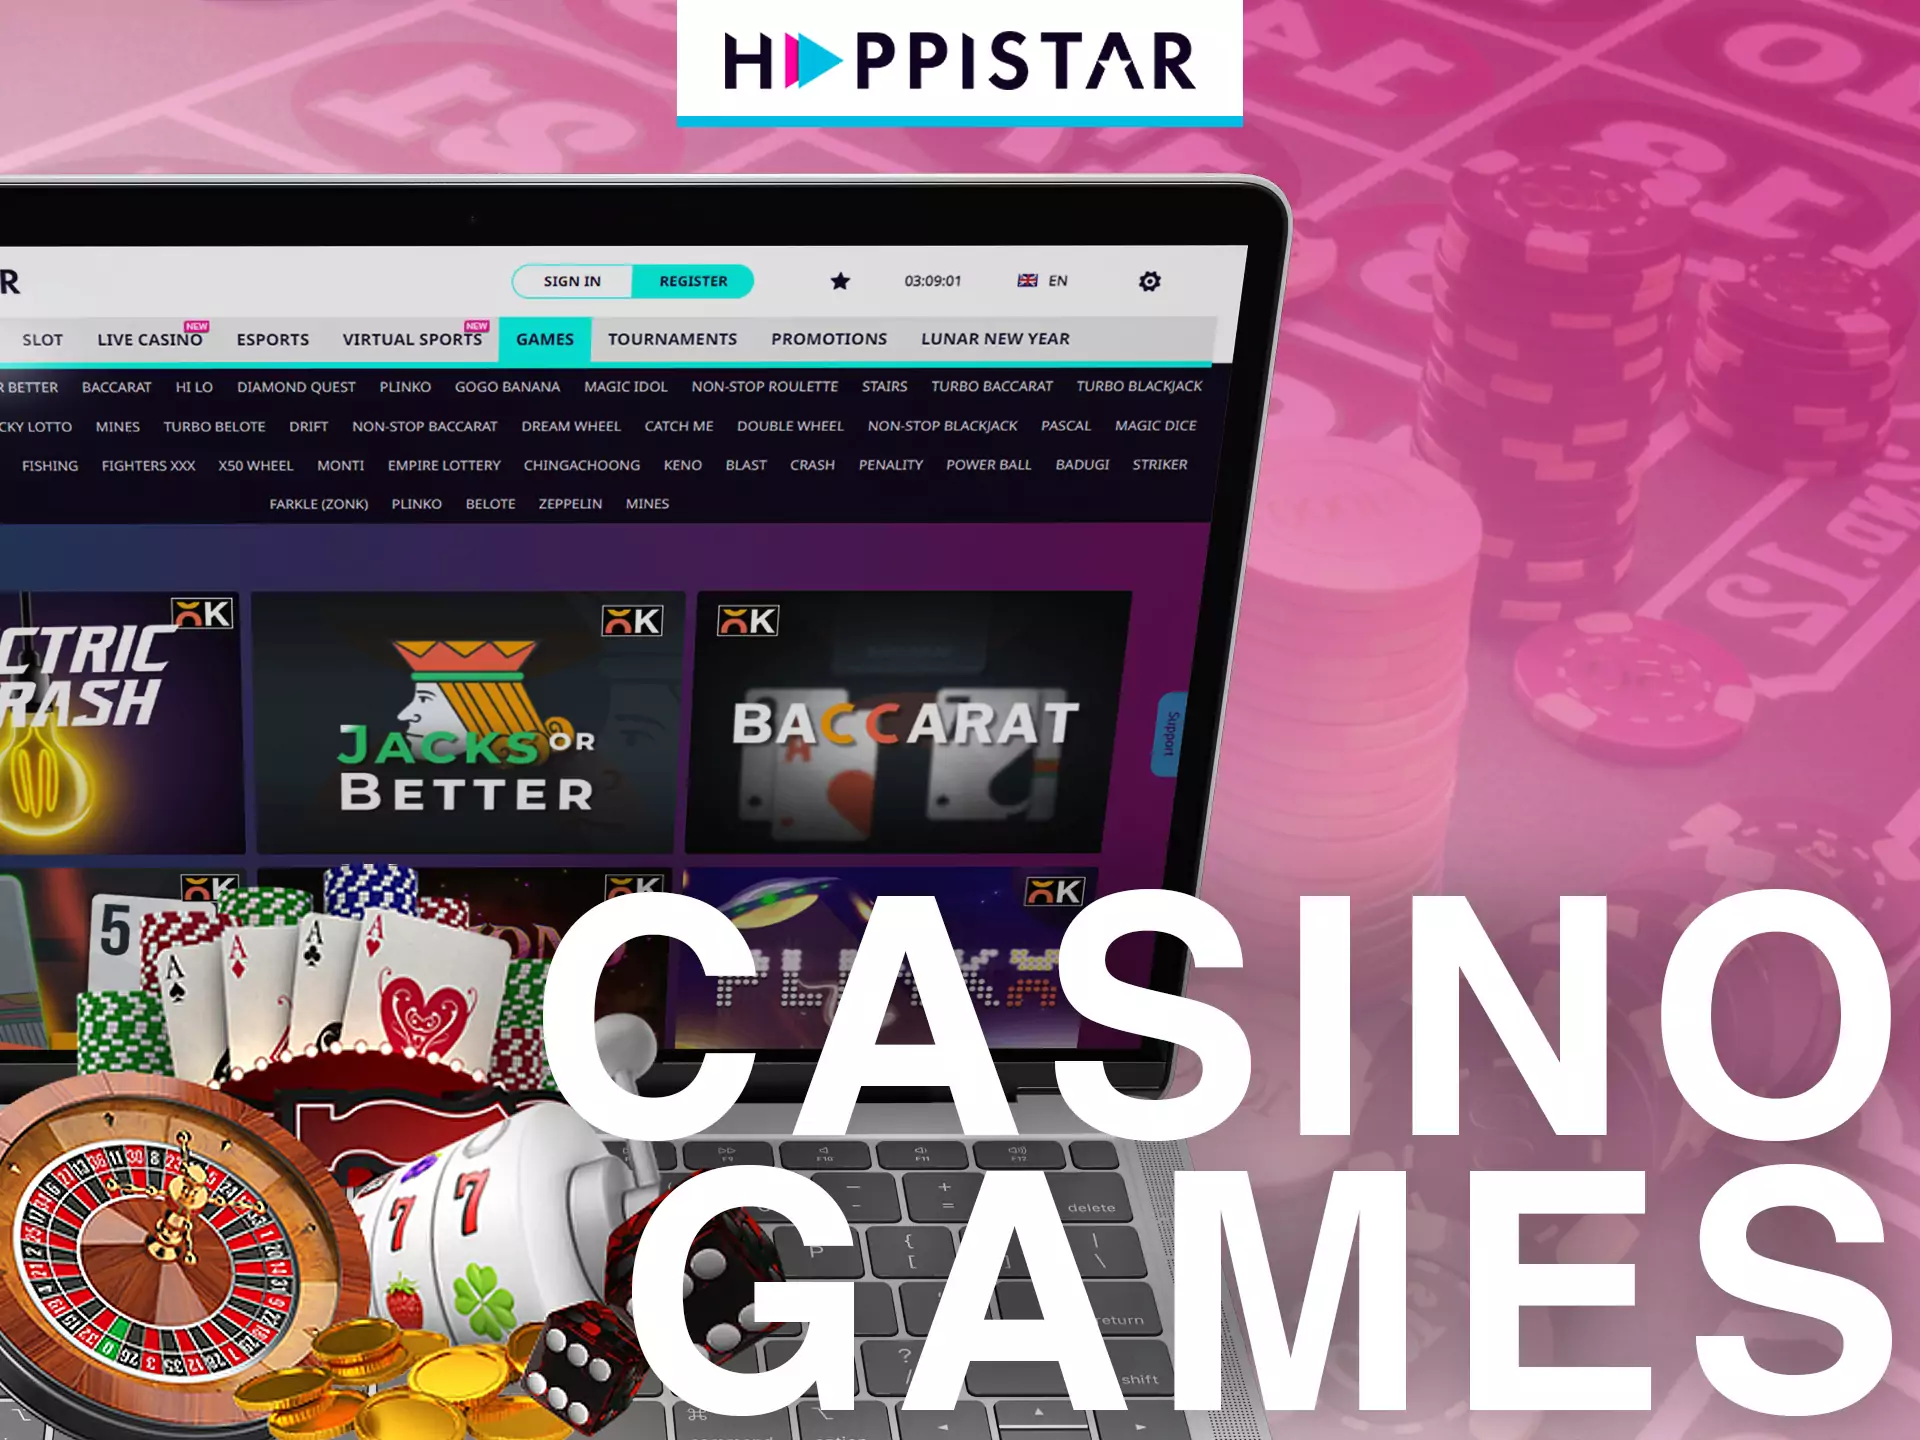 On Happistar, there are lots of slots and live casino games available for players.